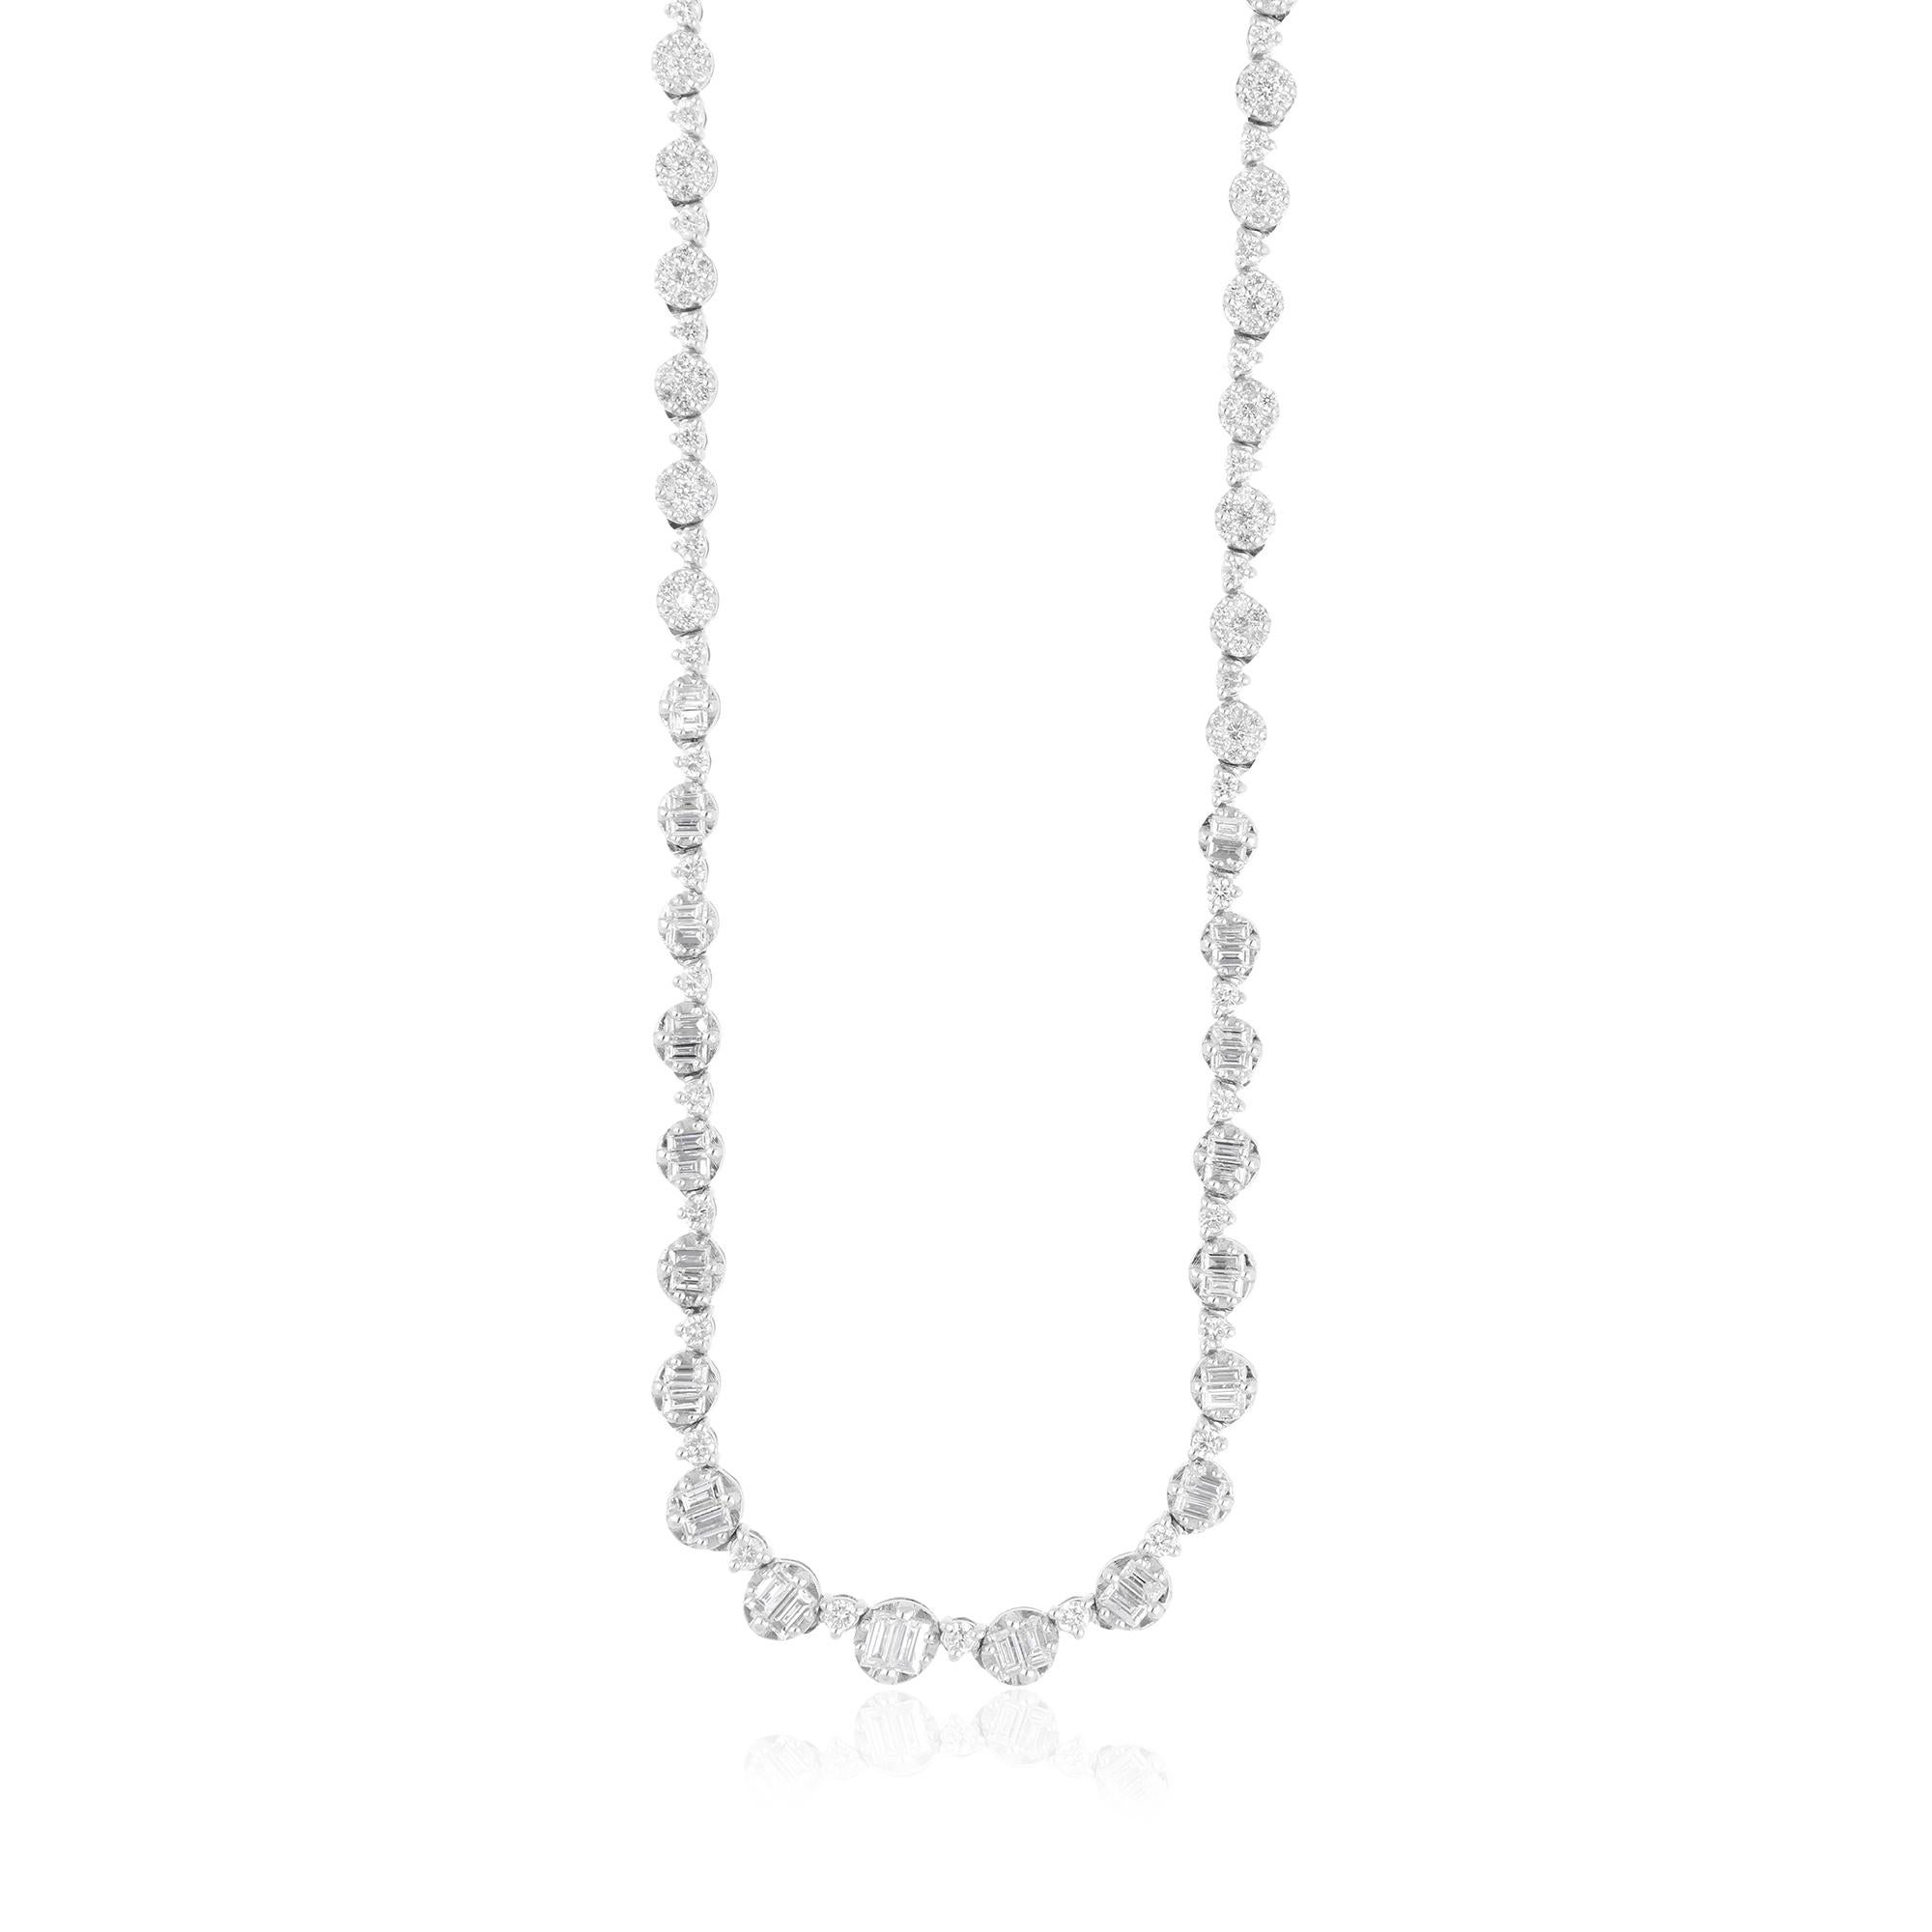 Exquisitely crafted and endlessly captivating, this 2.35-carat diamond necklace is a testament to the timeless allure of fine jewelry. Whether given as a gift to a loved one or treasured as a personal indulgence, it is sure to be cherished for